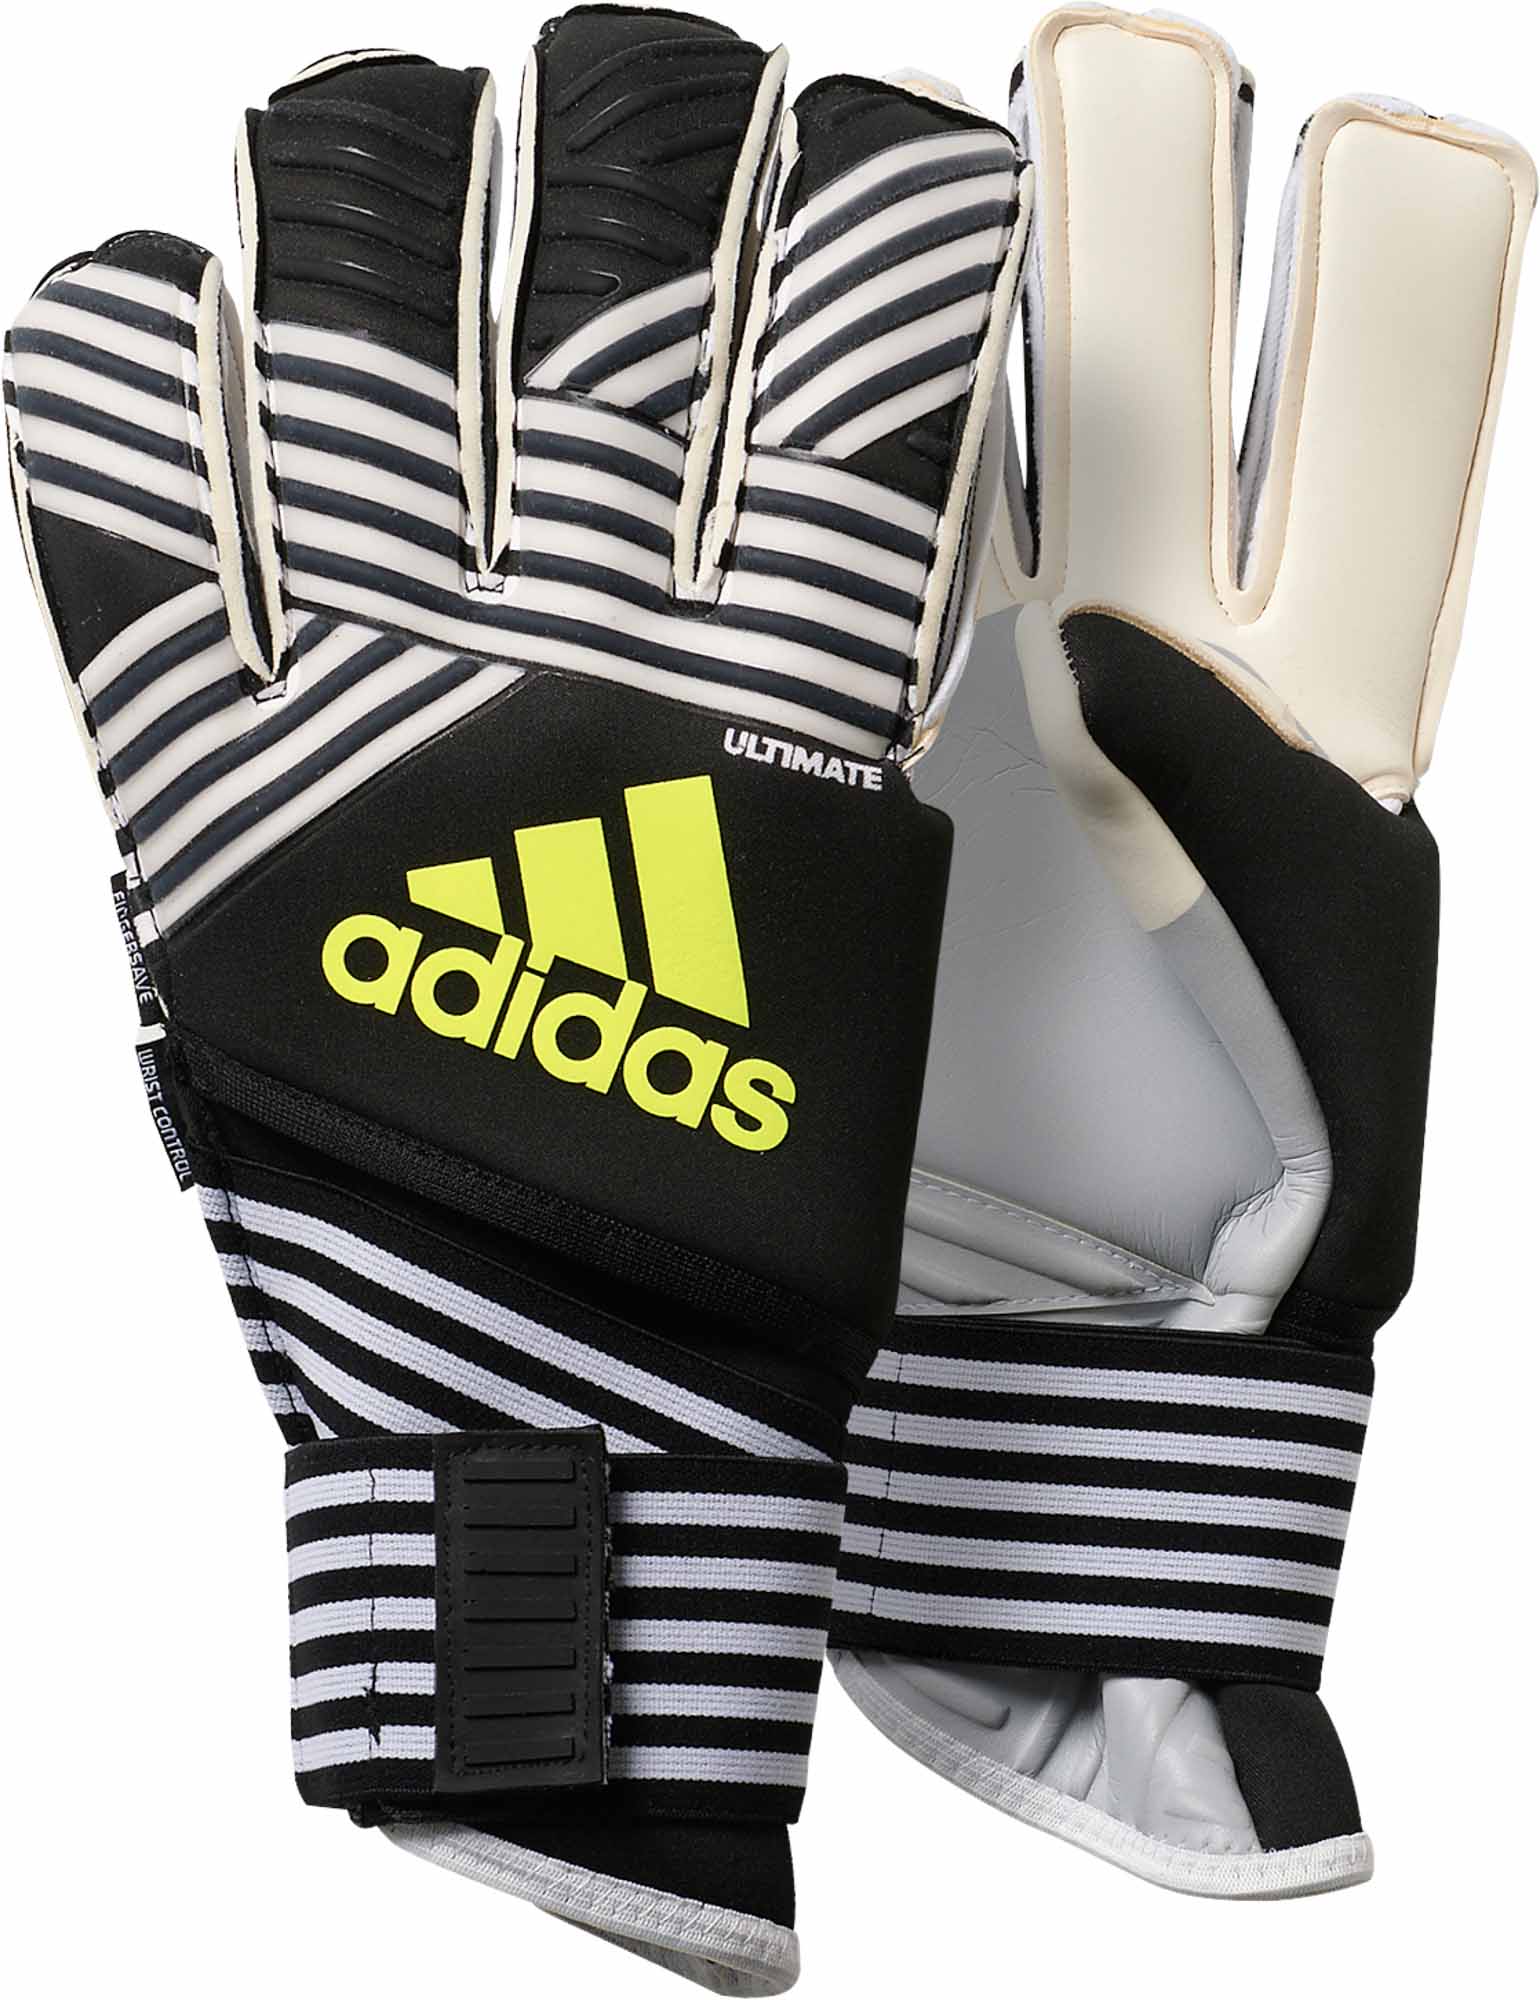 adidas ace trans ultimate goalkeeper gloves